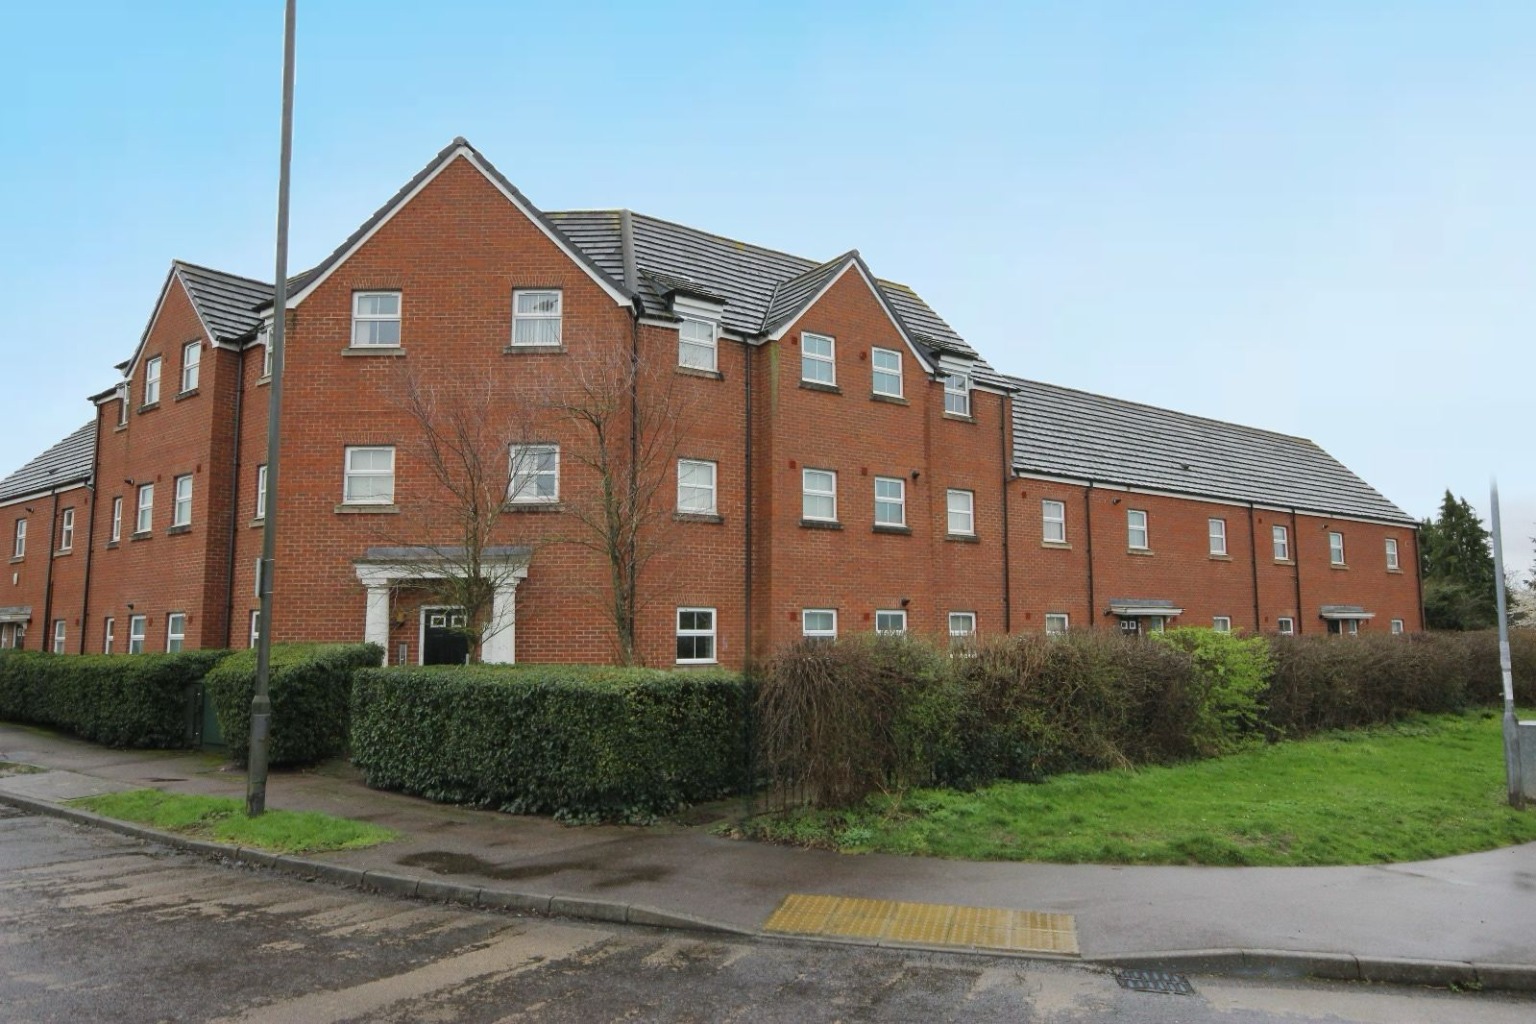 2 bed ground floor flat to rent in Twinwood Road, Bedford - Property Image 1